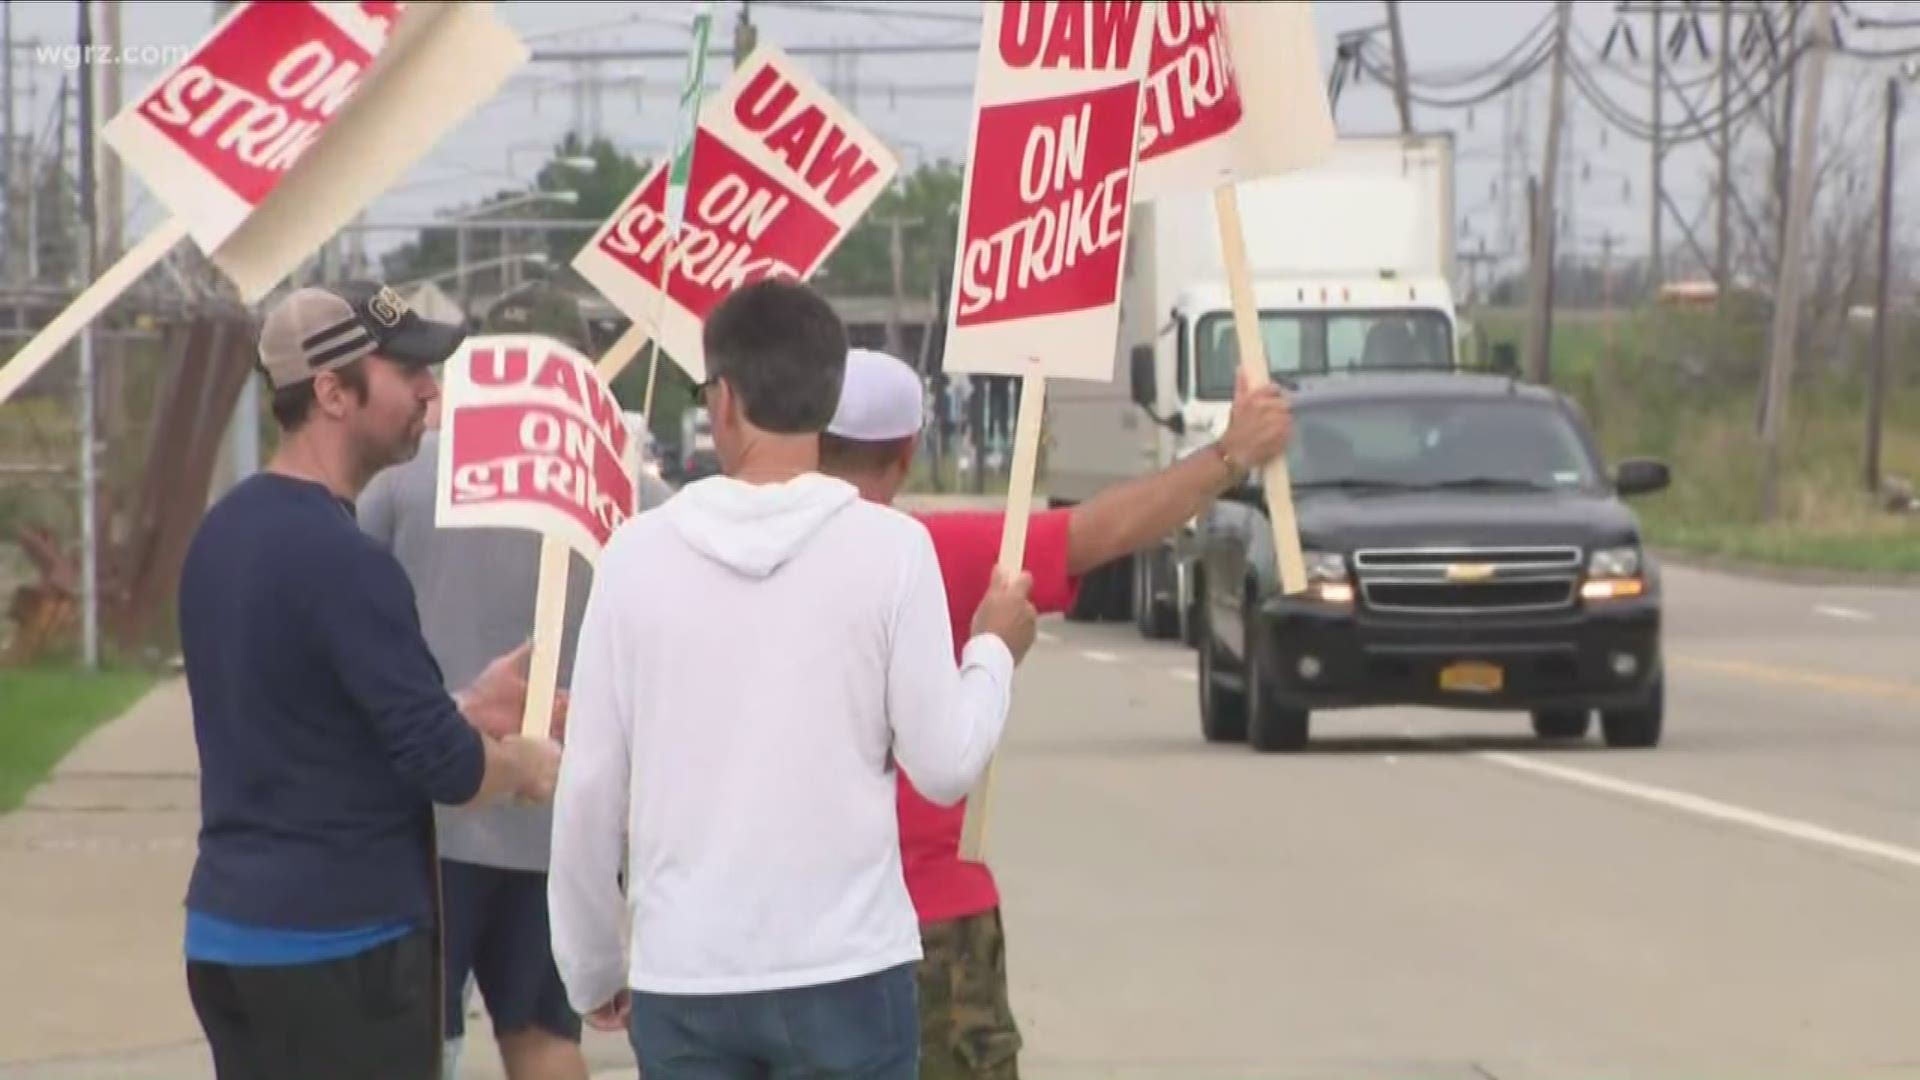 Starting at midnight - workers walked out of the job - picking up signs - demanding wage increases and profit sharing...